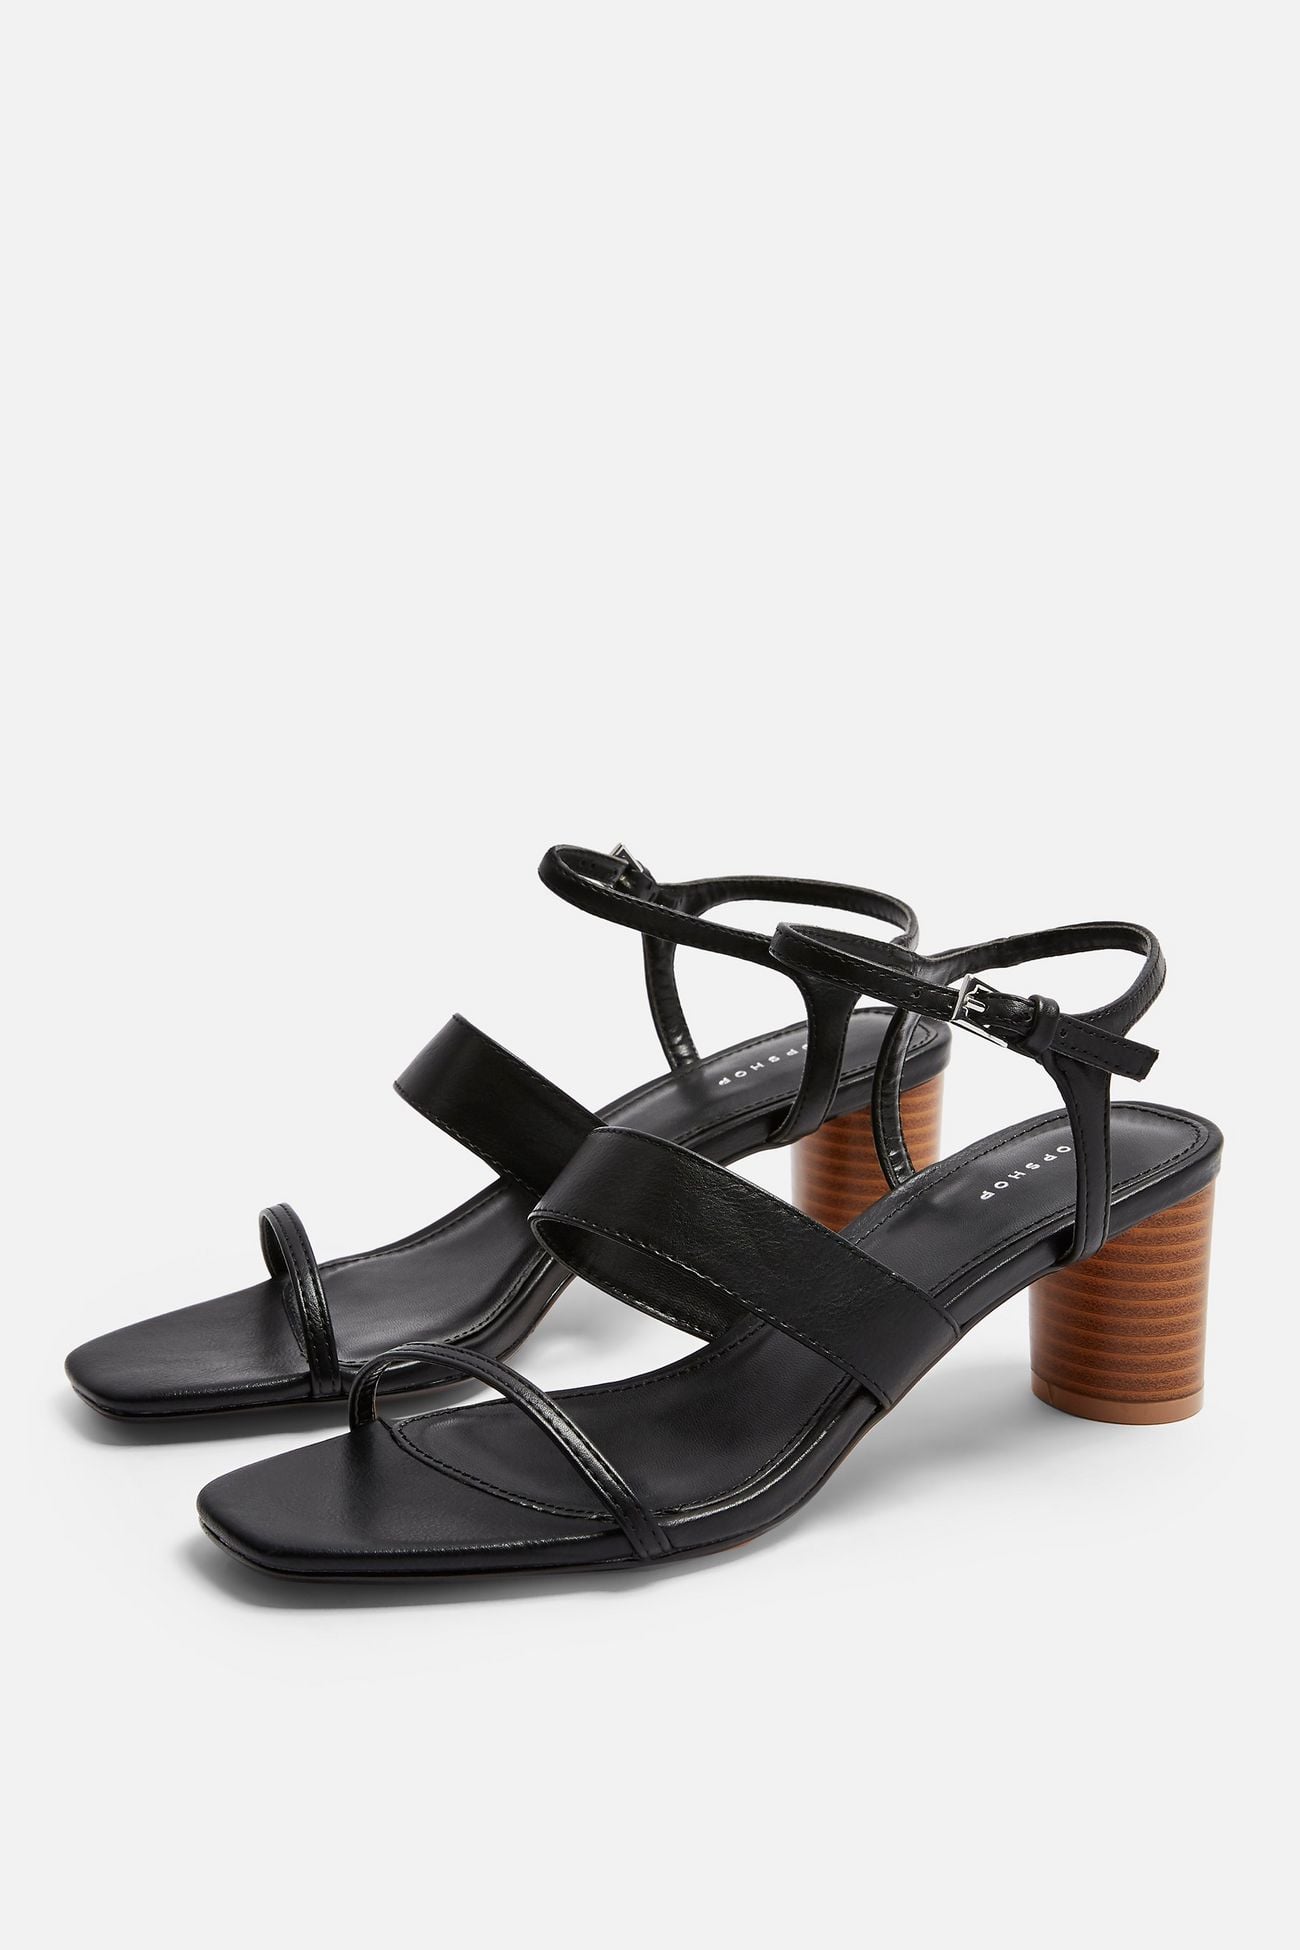 Topshop DITA Black Strap Sandals, Yes, Heeled Sandals Can Be Comfortable —  These 18 Cute Pairs Prove It